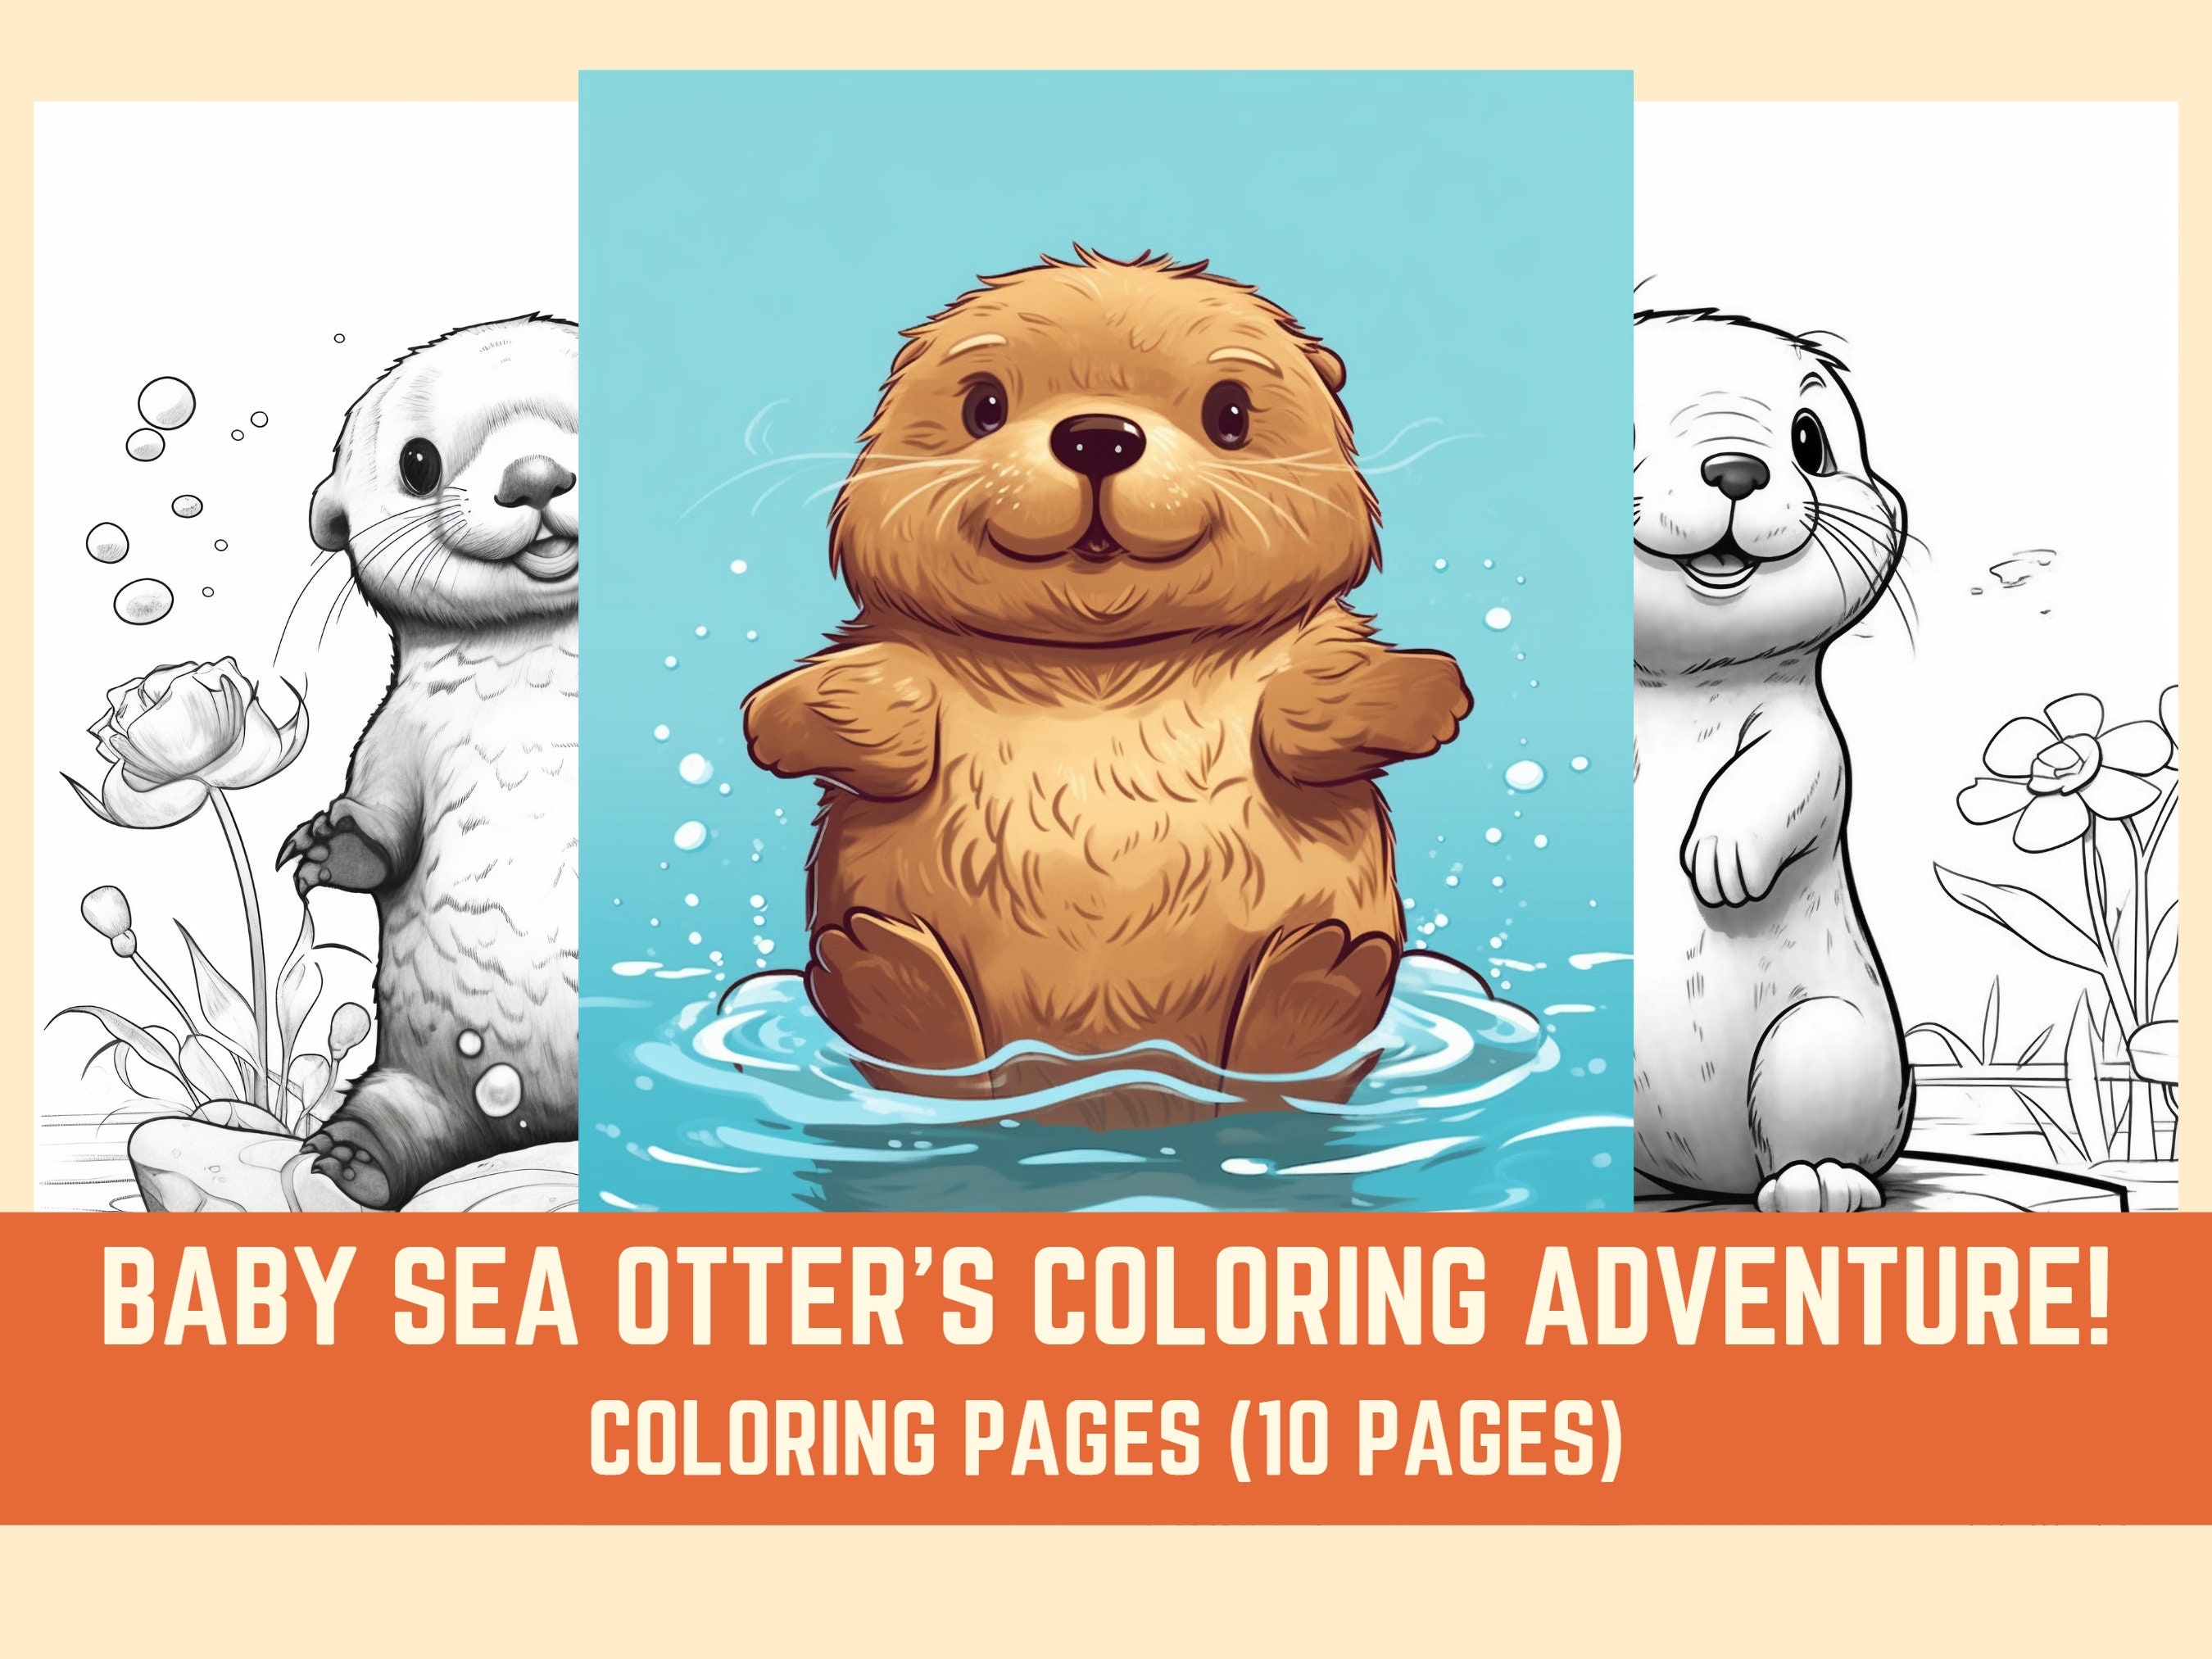 Sea Otter Coloring Book: A Cute Adult Coloring Book with 50+ Pages  Beautiful and Relaxing Otters Designs, Under The Sea, Perfect Otter Gifts  for Otter Lovers. by Studio JK Wixson